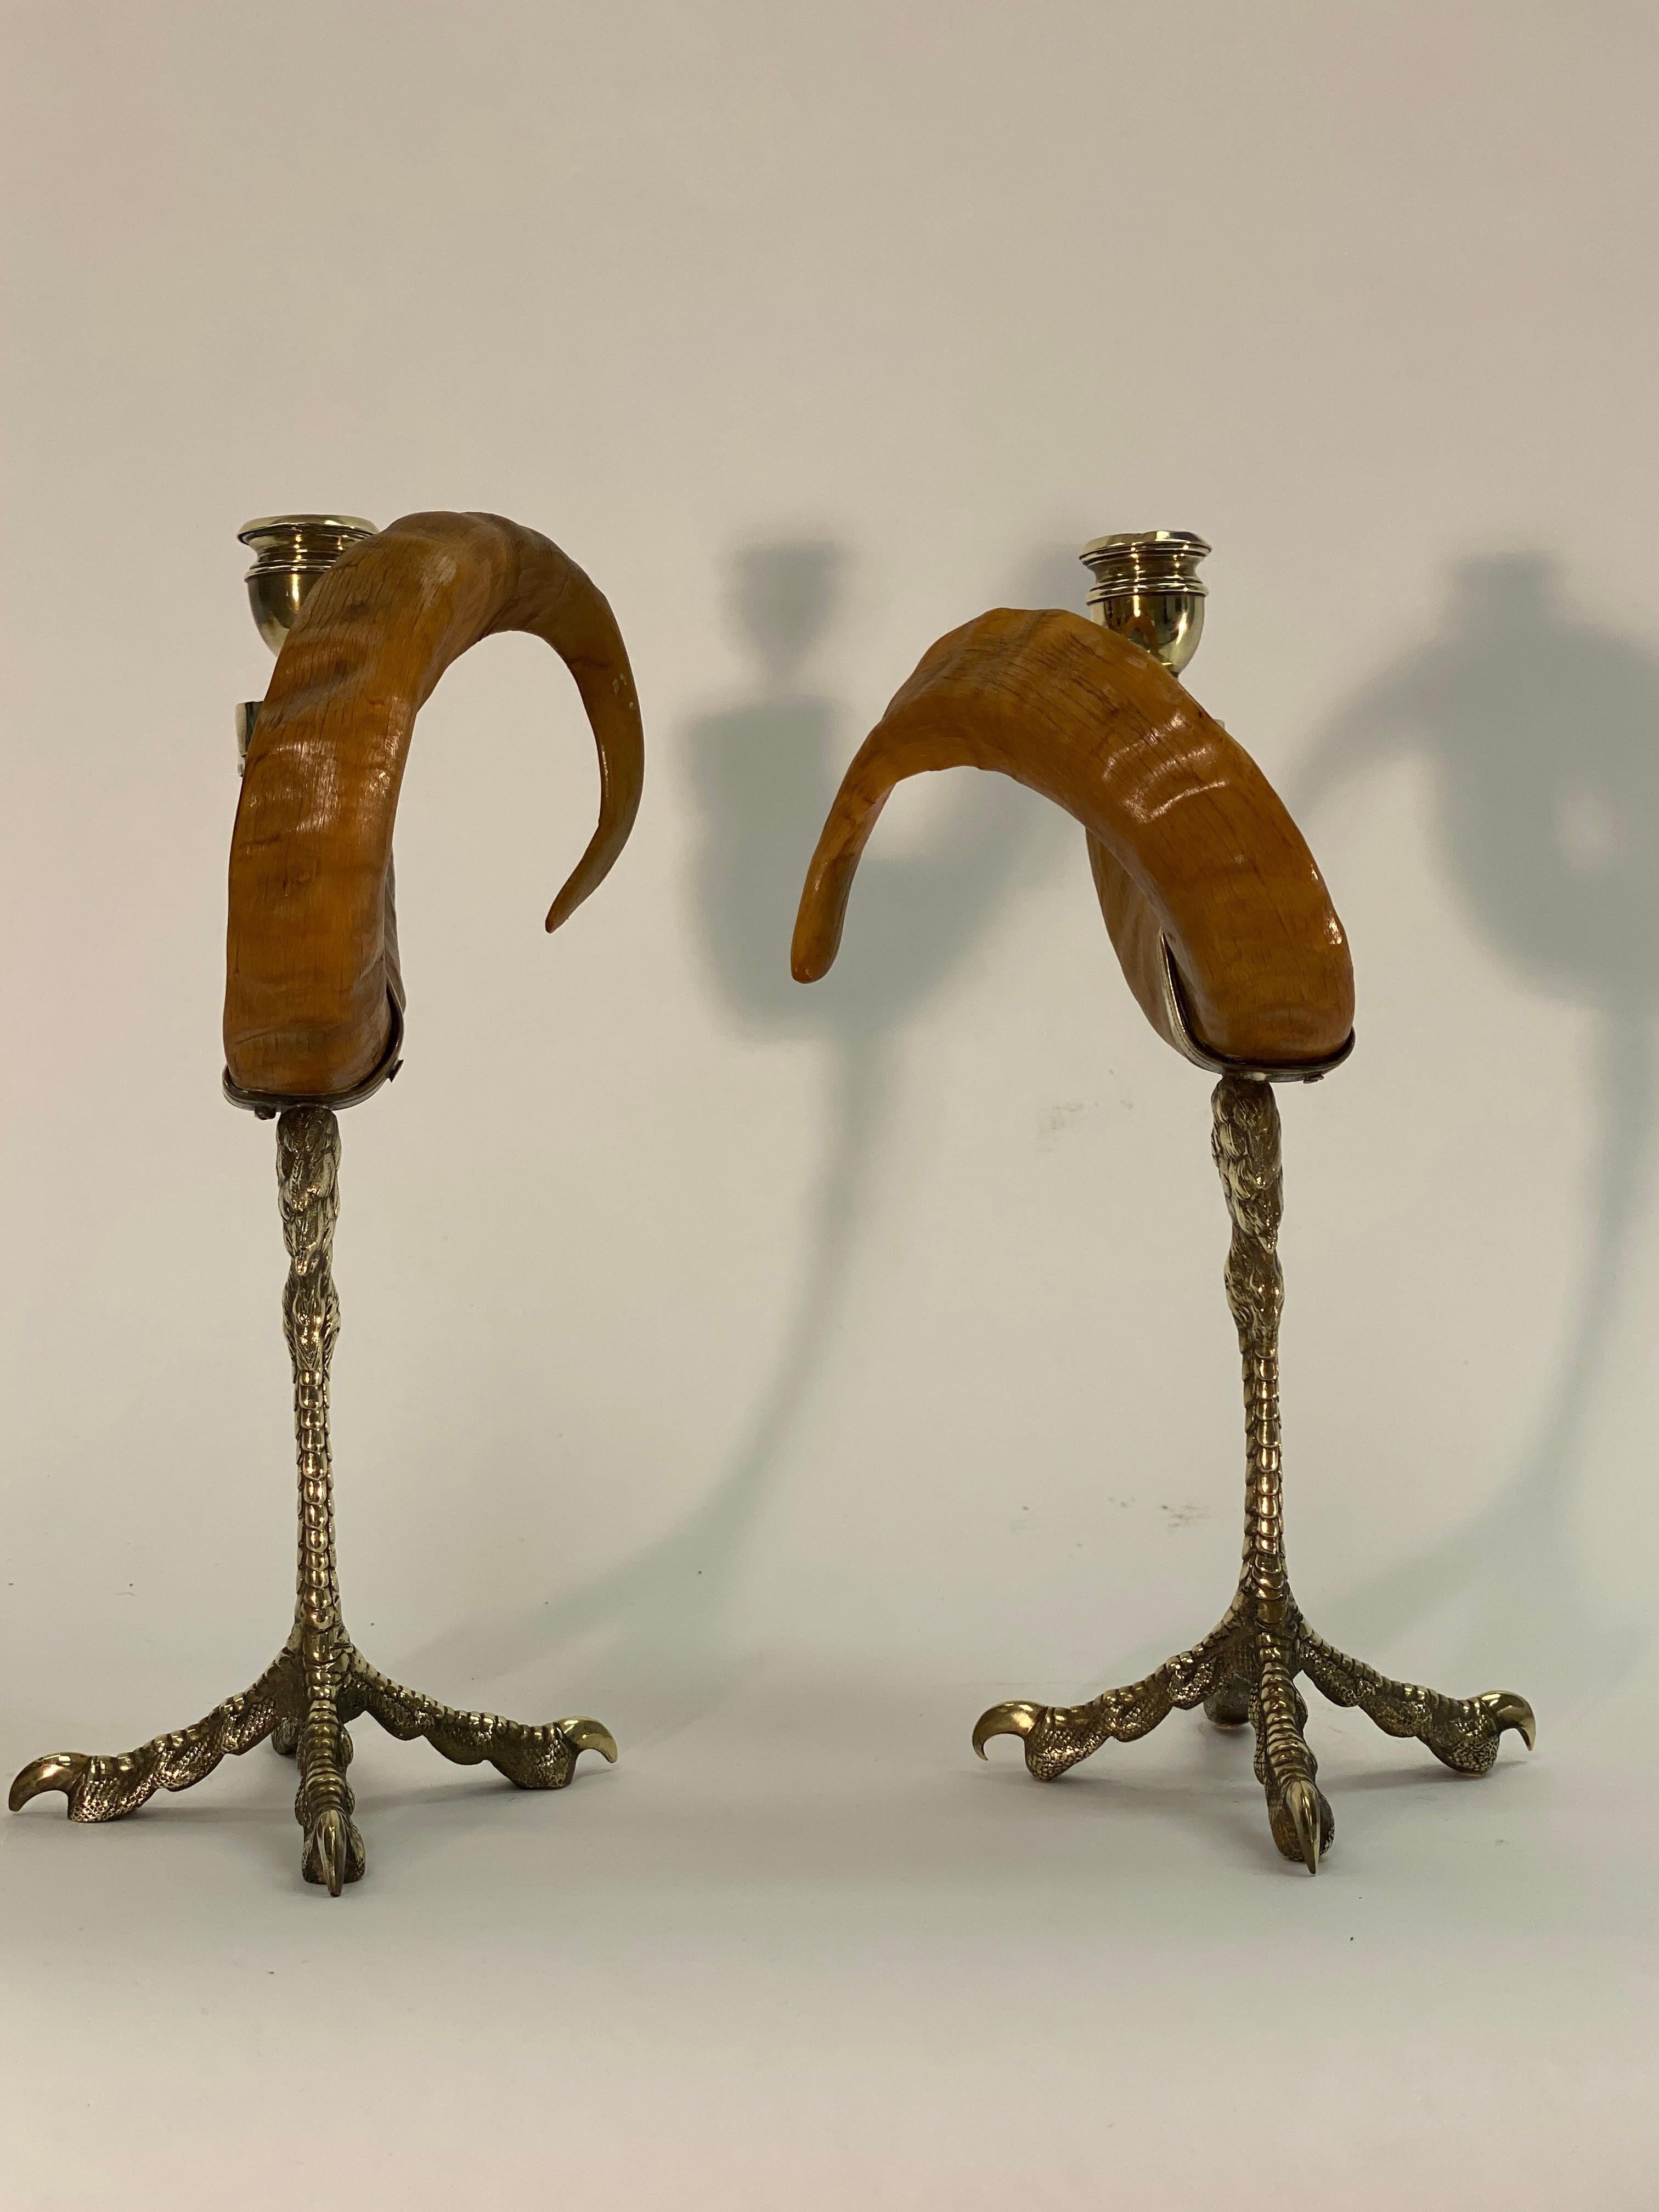 A unique pair of candlesticks by Anthony Redmile. Rams horns mounted to a brass pair of talons. Anthony Redmile gained notoriety in the London interior design scene in the 1960s, producing some of the most eclectic items for his illustrious clients.